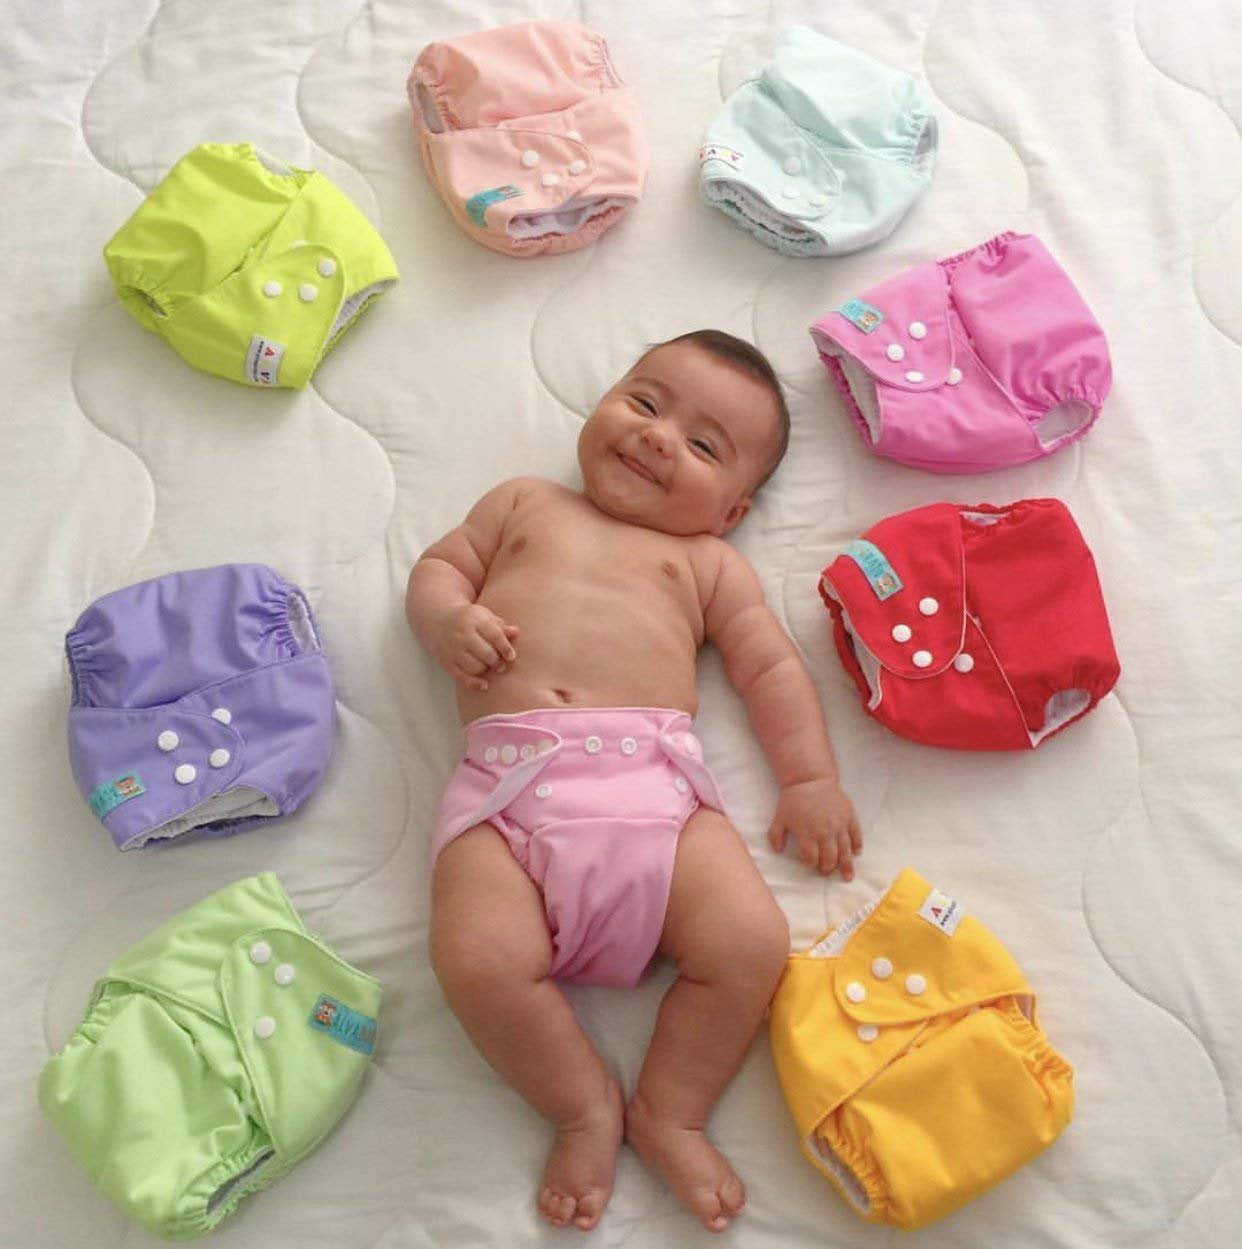 ALVABABY Baby Cloth Diapers 6 Pack with 12 Inserts Adjustable Washable and Reusable Pocket Diapers for Baby Girls 6BM88 